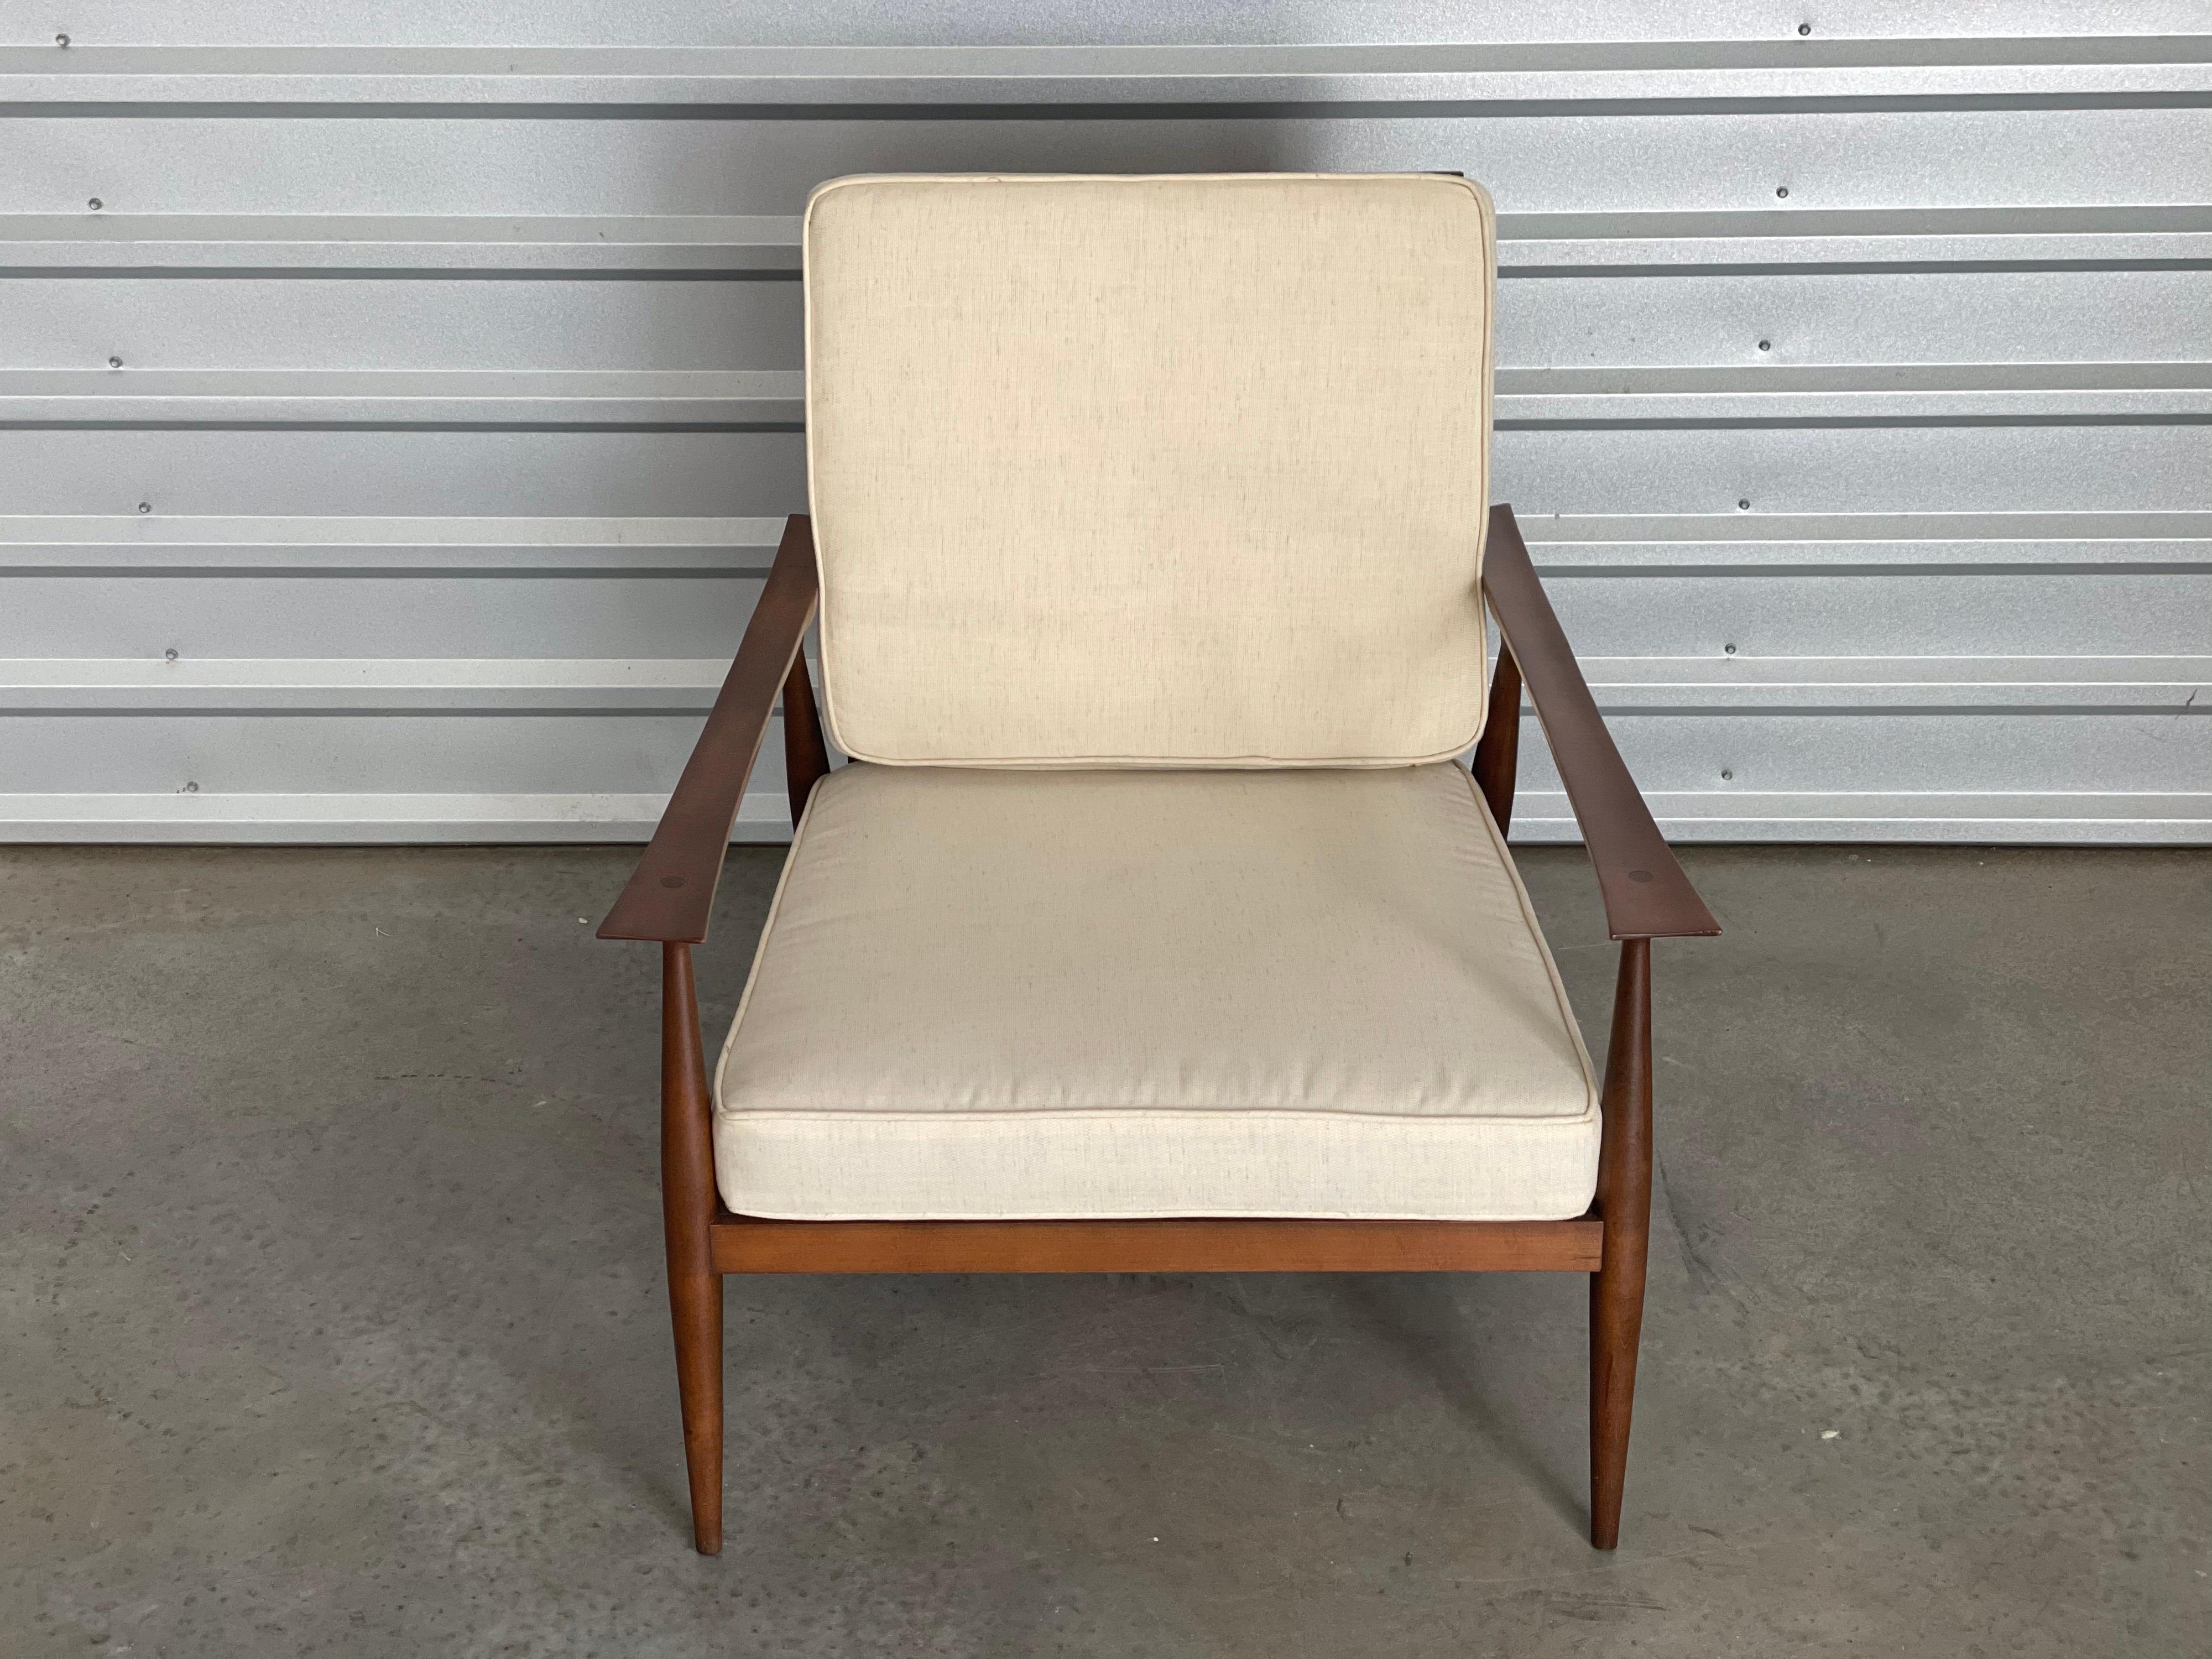 Rare Mid Century Modern Lounge Chair by Paul McCobb for Winchendon 4